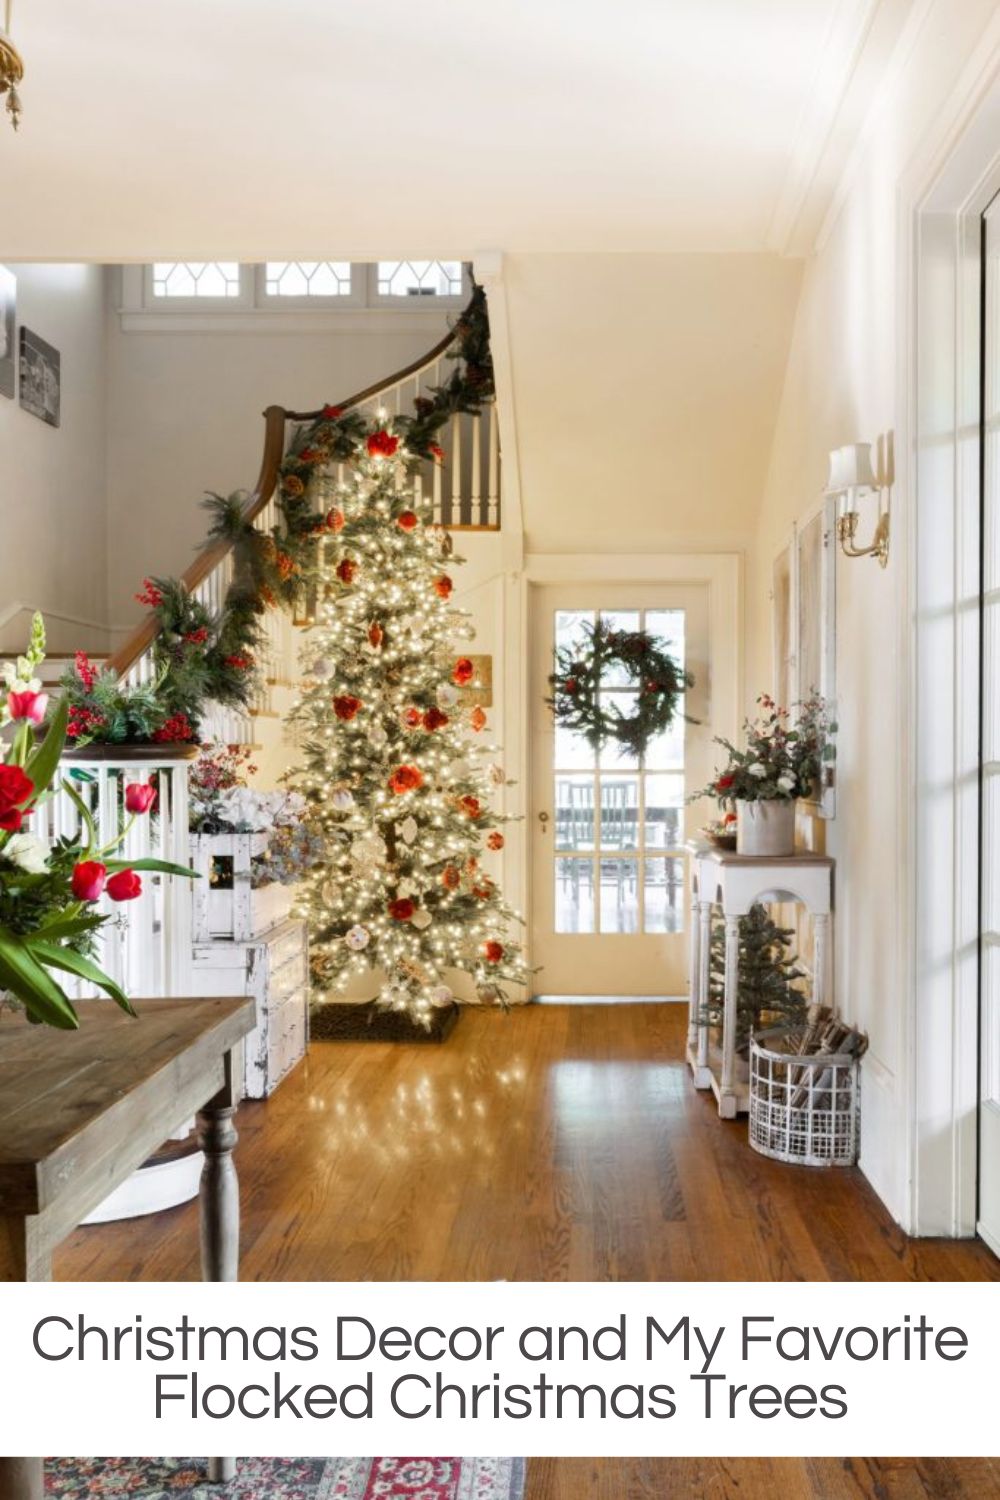 In my book A Home to Share, I featured our annual Christmas party decorated with flocked Christmas trees, wreaths, and garlands.